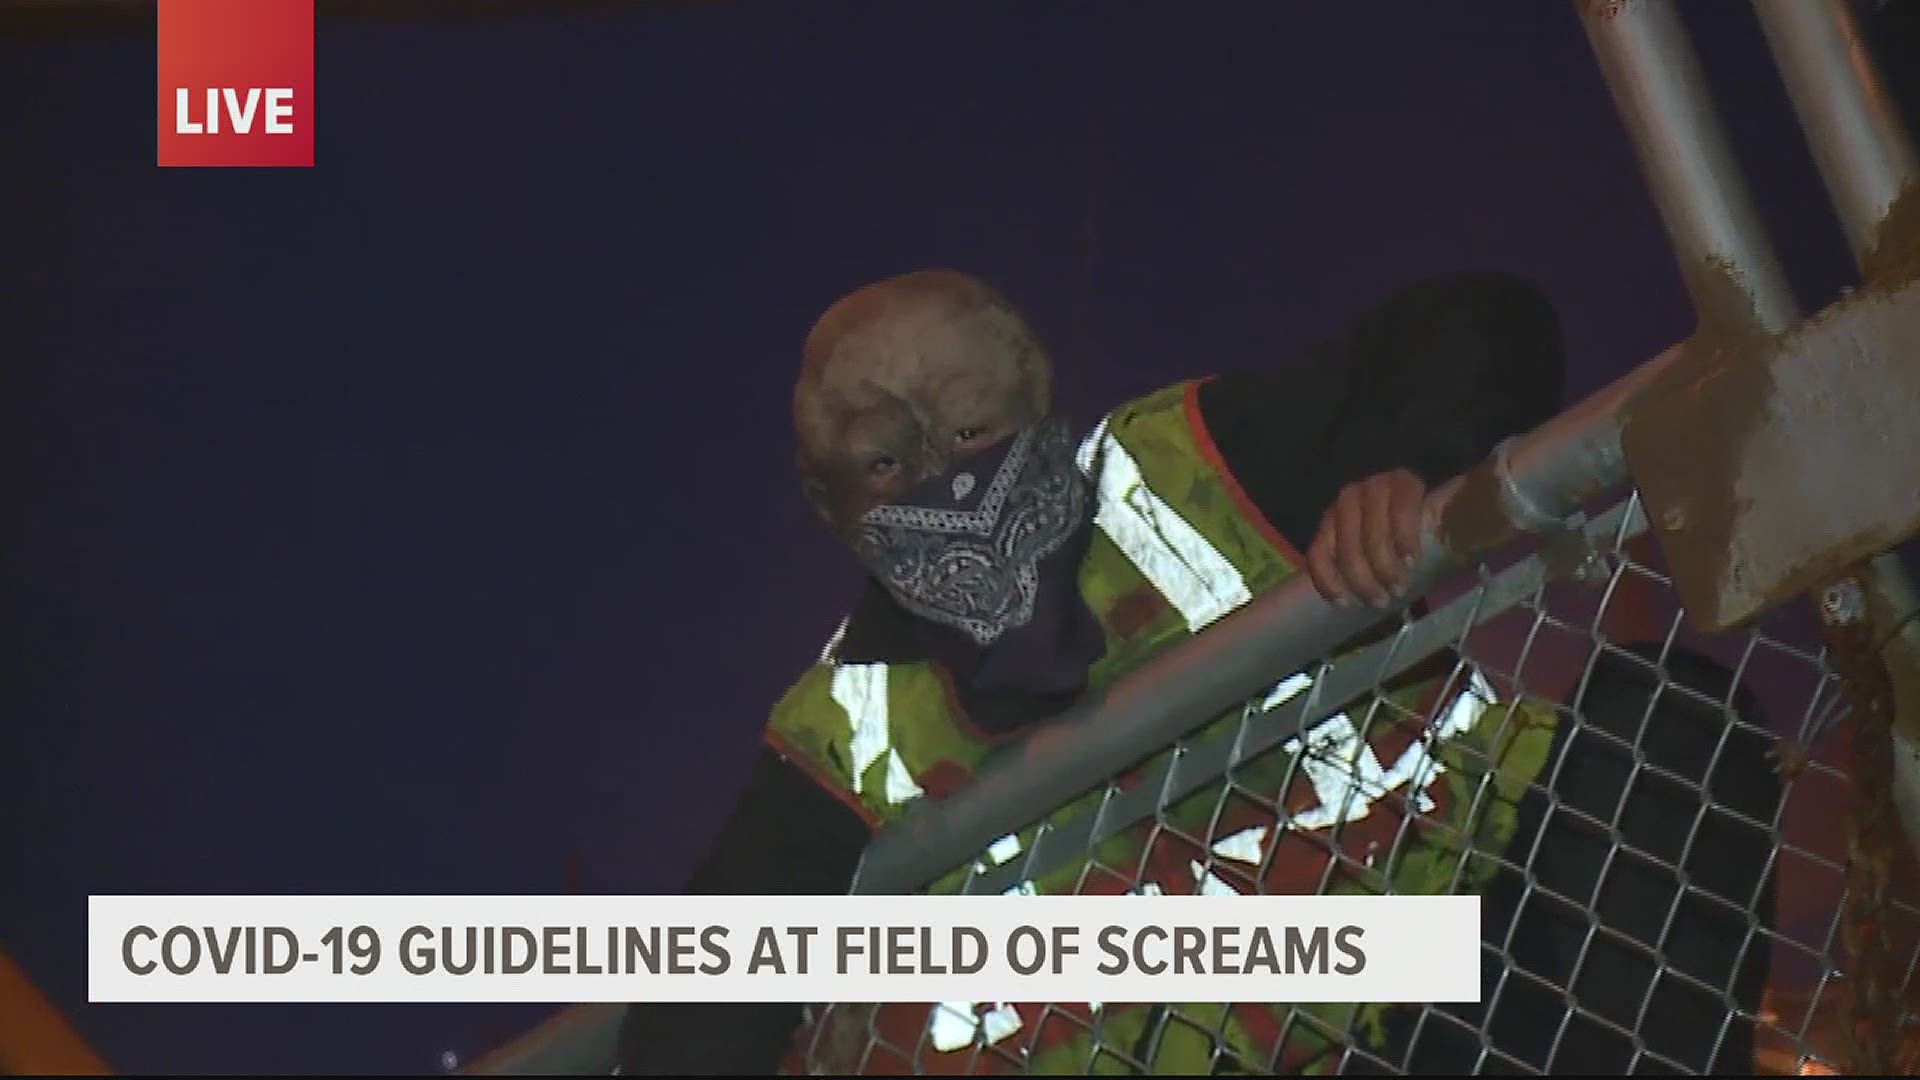 All of the Field of Screams attractions are now open for the season, with new safety guidelines in place for Covid-19.